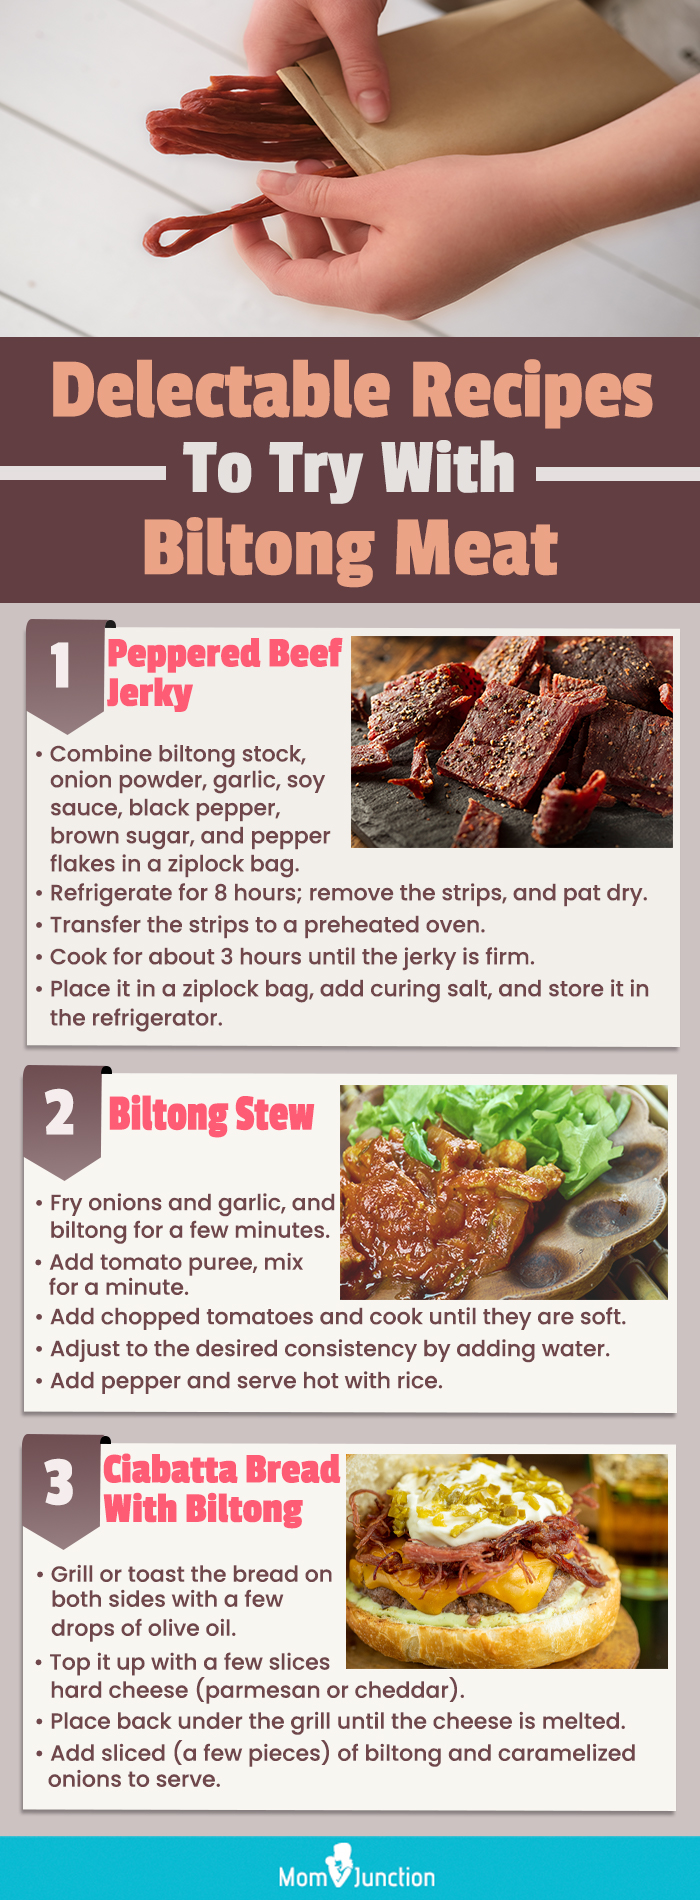 delectable recipes to try with biltong meato (infographic)